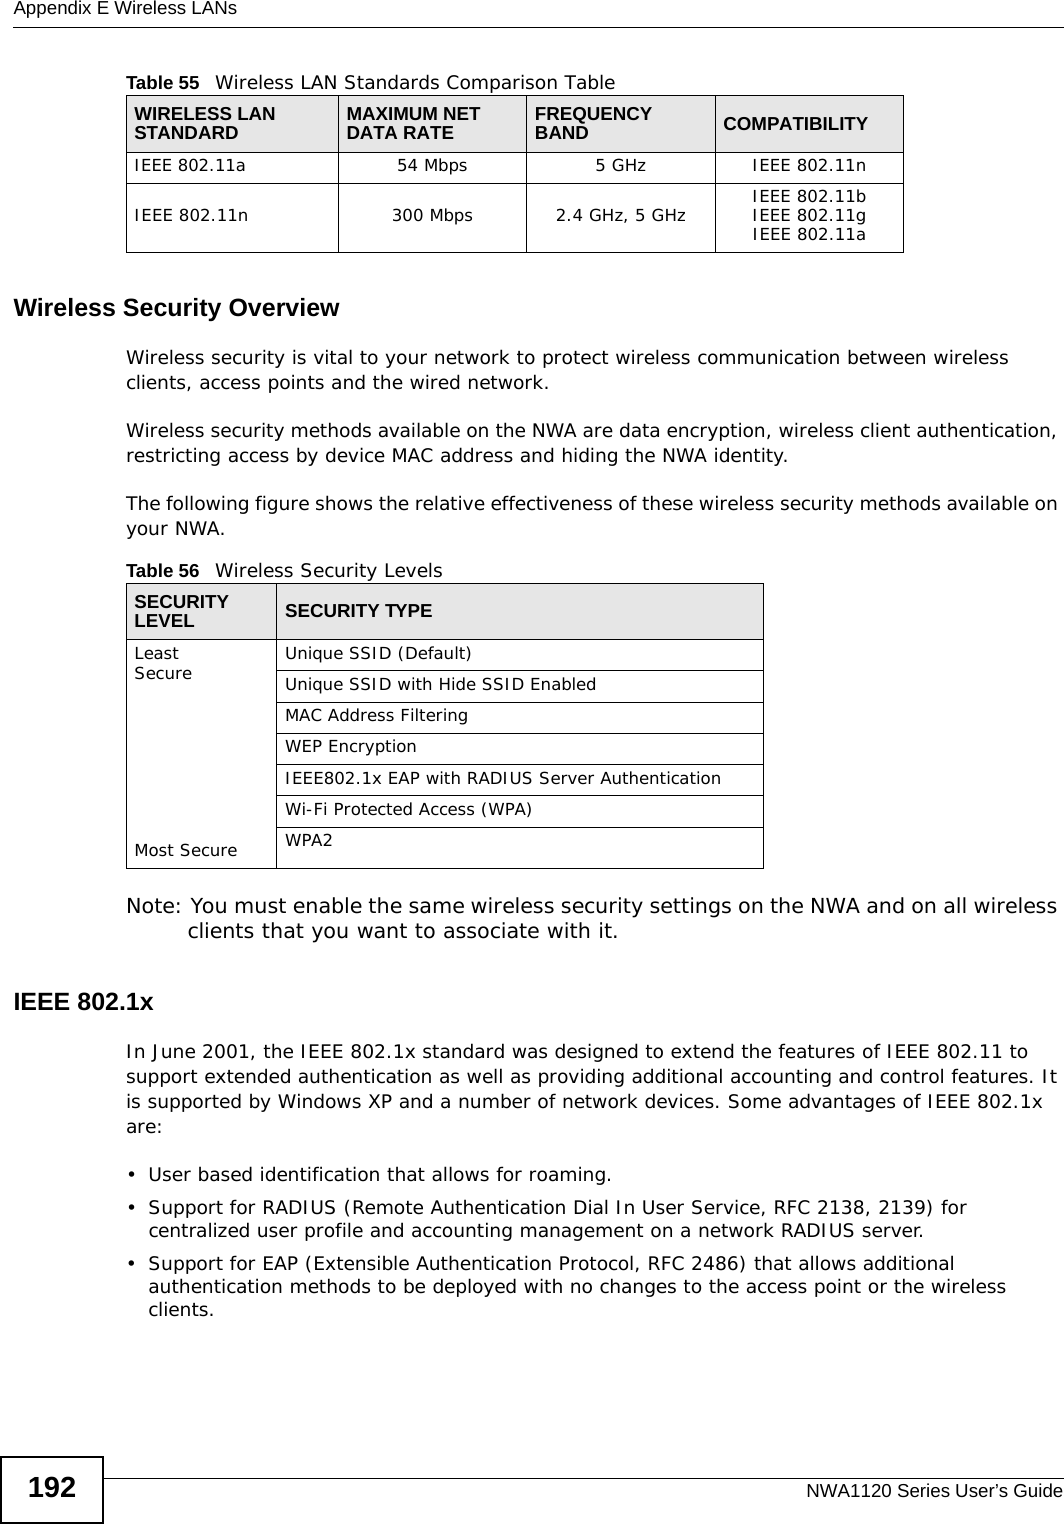 Appendix E Wireless LANsNWA1120 Series User’s Guide192Wireless Security OverviewWireless security is vital to your network to protect wireless communication between wireless clients, access points and the wired network.Wireless security methods available on the NWA are data encryption, wireless client authentication, restricting access by device MAC address and hiding the NWA identity.The following figure shows the relative effectiveness of these wireless security methods available on your NWA.Note: You must enable the same wireless security settings on the NWA and on all wireless clients that you want to associate with it. IEEE 802.1xIn June 2001, the IEEE 802.1x standard was designed to extend the features of IEEE 802.11 to support extended authentication as well as providing additional accounting and control features. It is supported by Windows XP and a number of network devices. Some advantages of IEEE 802.1x are:• User based identification that allows for roaming.• Support for RADIUS (Remote Authentication Dial In User Service, RFC 2138, 2139) for centralized user profile and accounting management on a network RADIUS server. • Support for EAP (Extensible Authentication Protocol, RFC 2486) that allows additional authentication methods to be deployed with no changes to the access point or the wireless clients. IEEE 802.11a54 Mbps 5 GHz IEEE 802.11nIEEE 802.11n 300 Mbps 2.4 GHz, 5 GHz IEEE 802.11bIEEE 802.11gIEEE 802.11aTable 55   Wireless LAN Standards Comparison TableWIRELESS LAN STANDARD MAXIMUM NET DATA RATE FREQUENCY BAND COMPATIBILITYTable 56   Wireless Security LevelsSECURITY LEVEL SECURITY TYPELeast       Secure                                                                                  Most SecureUnique SSID (Default)Unique SSID with Hide SSID EnabledMAC Address FilteringWEP EncryptionIEEE802.1x EAP with RADIUS Server AuthenticationWi-Fi Protected Access (WPA)WPA2